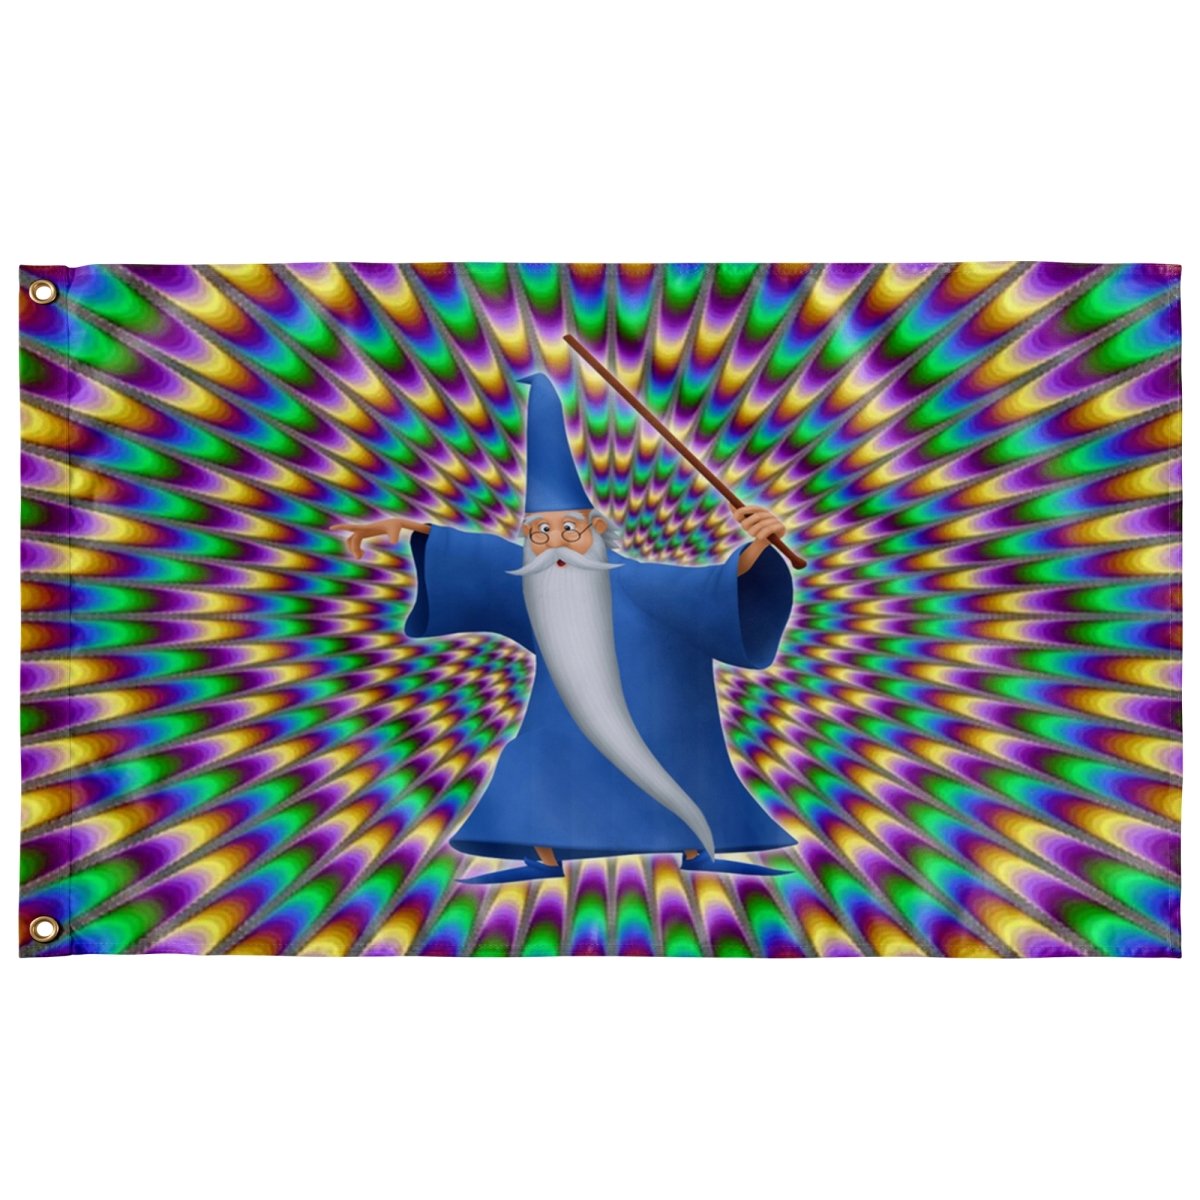 MERLIN THE WIZARD FLAG